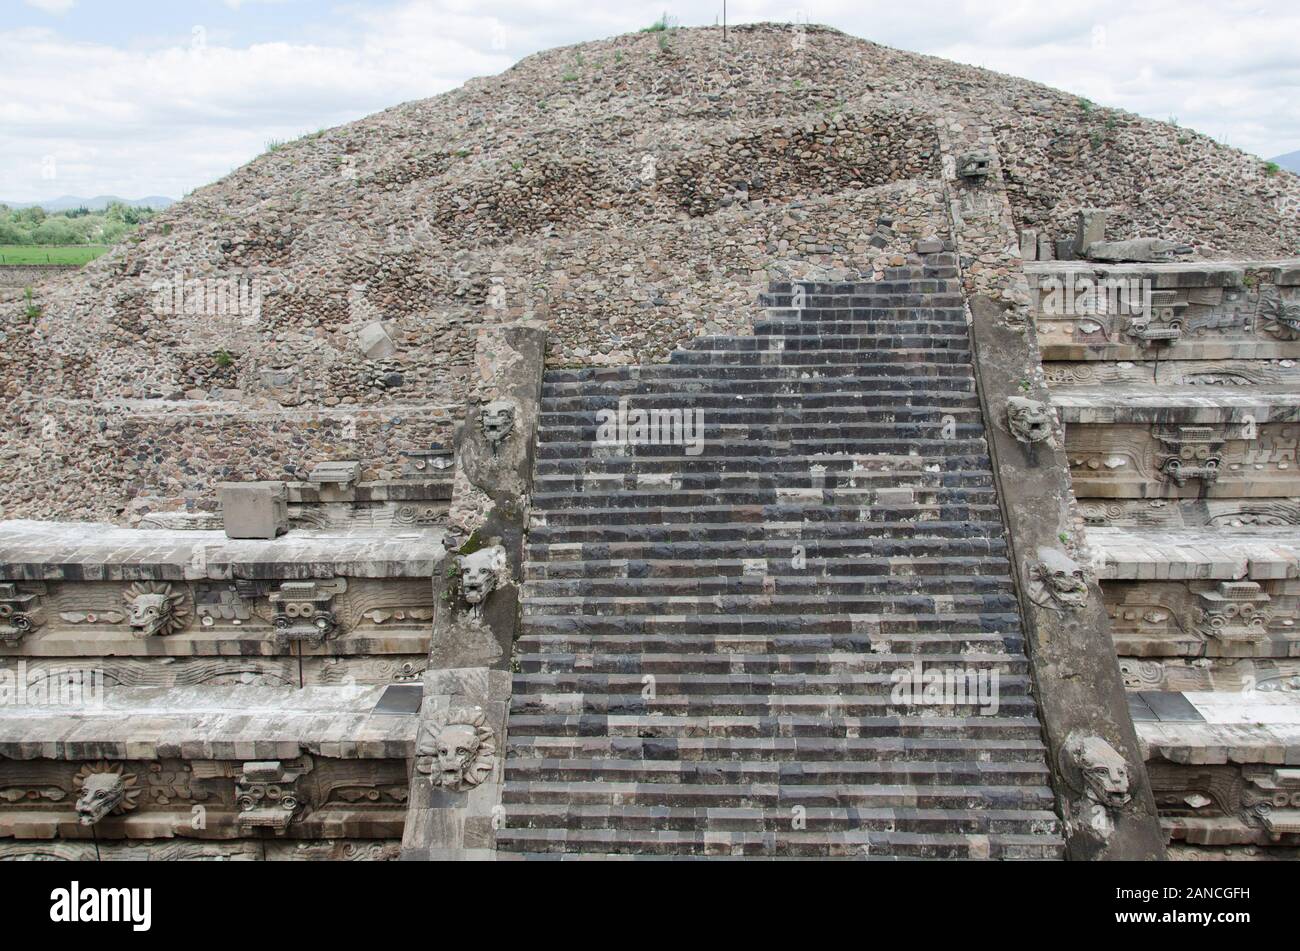 Temple of the Feathered Serpent, Quetzalcoatl, in Teotihuacan, a prehispanic Mesoamerican city located in the Valley of Mexico Stock Photo